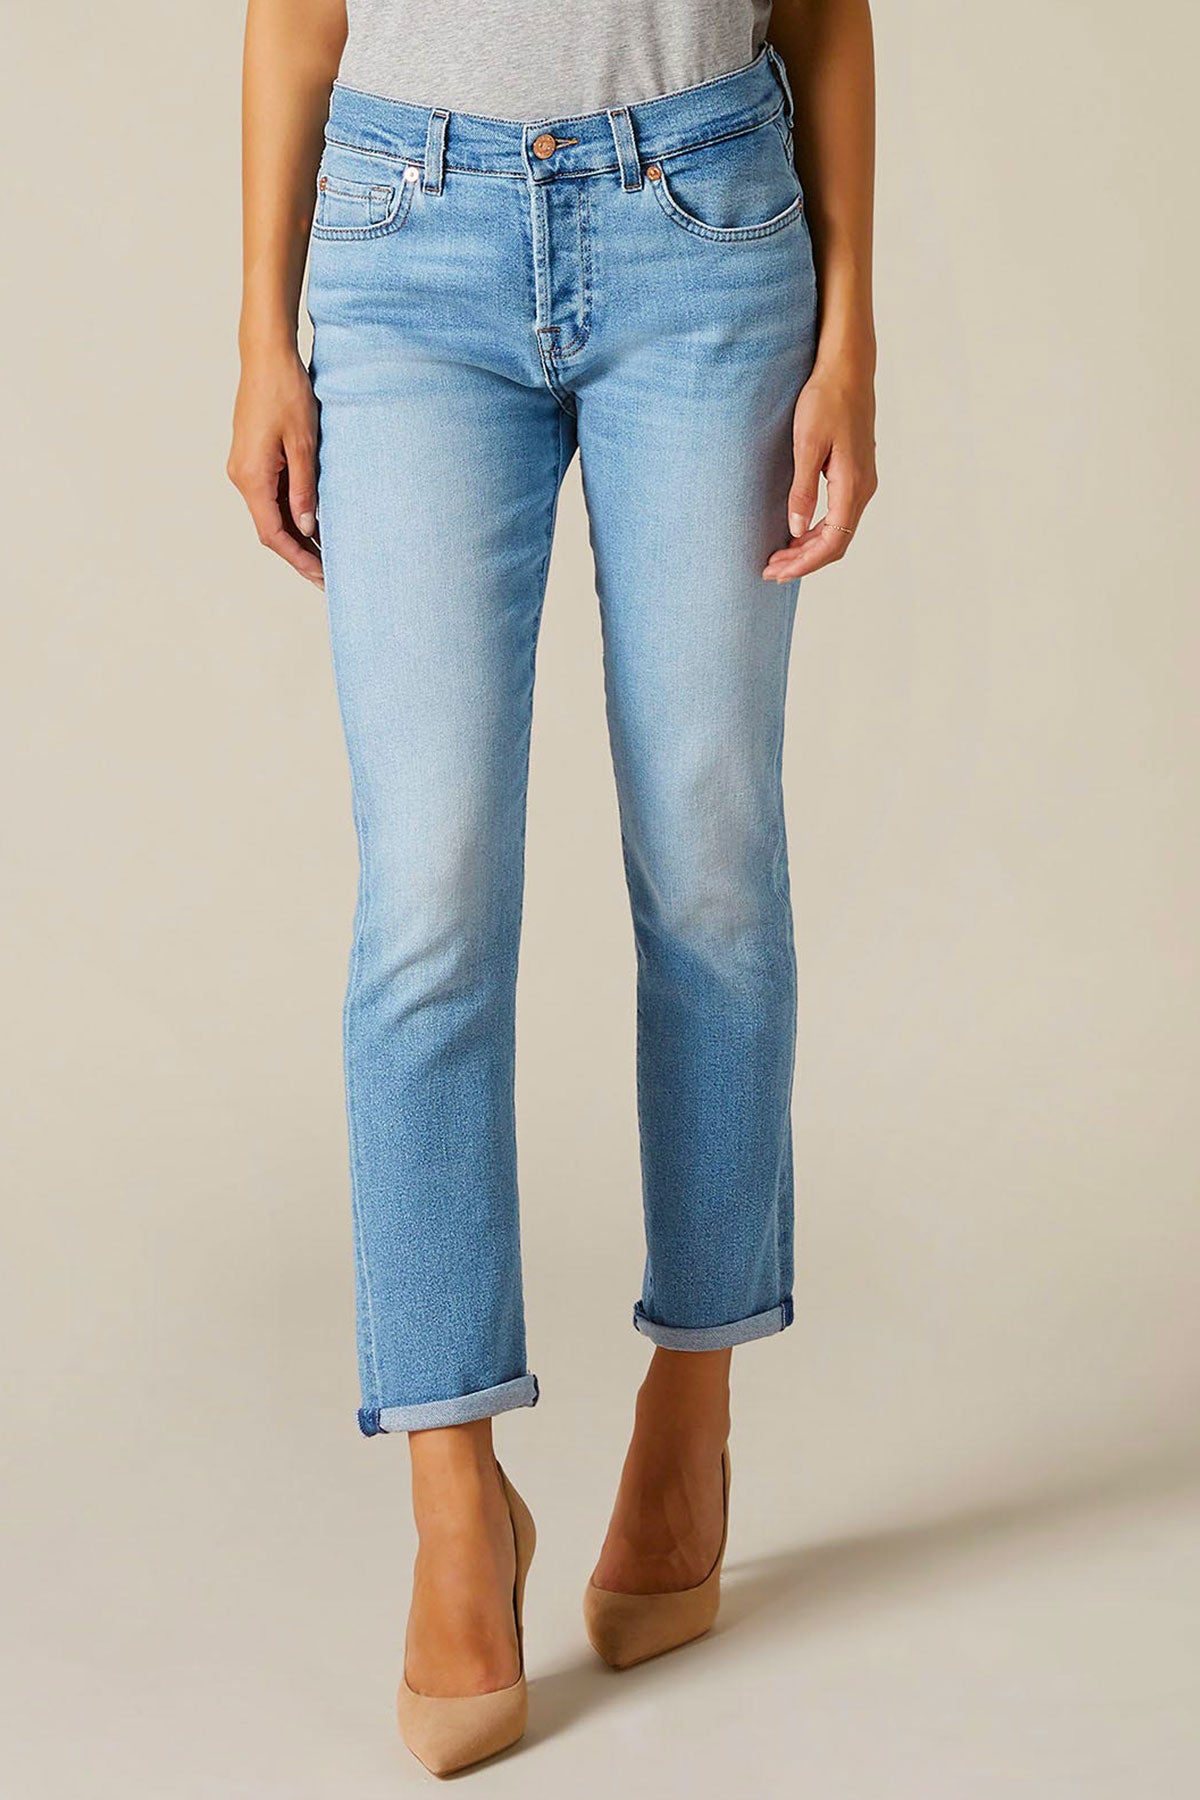 7 For All Mankind Asher Boyfriend Jeans-Libas Trendy Fashion Store